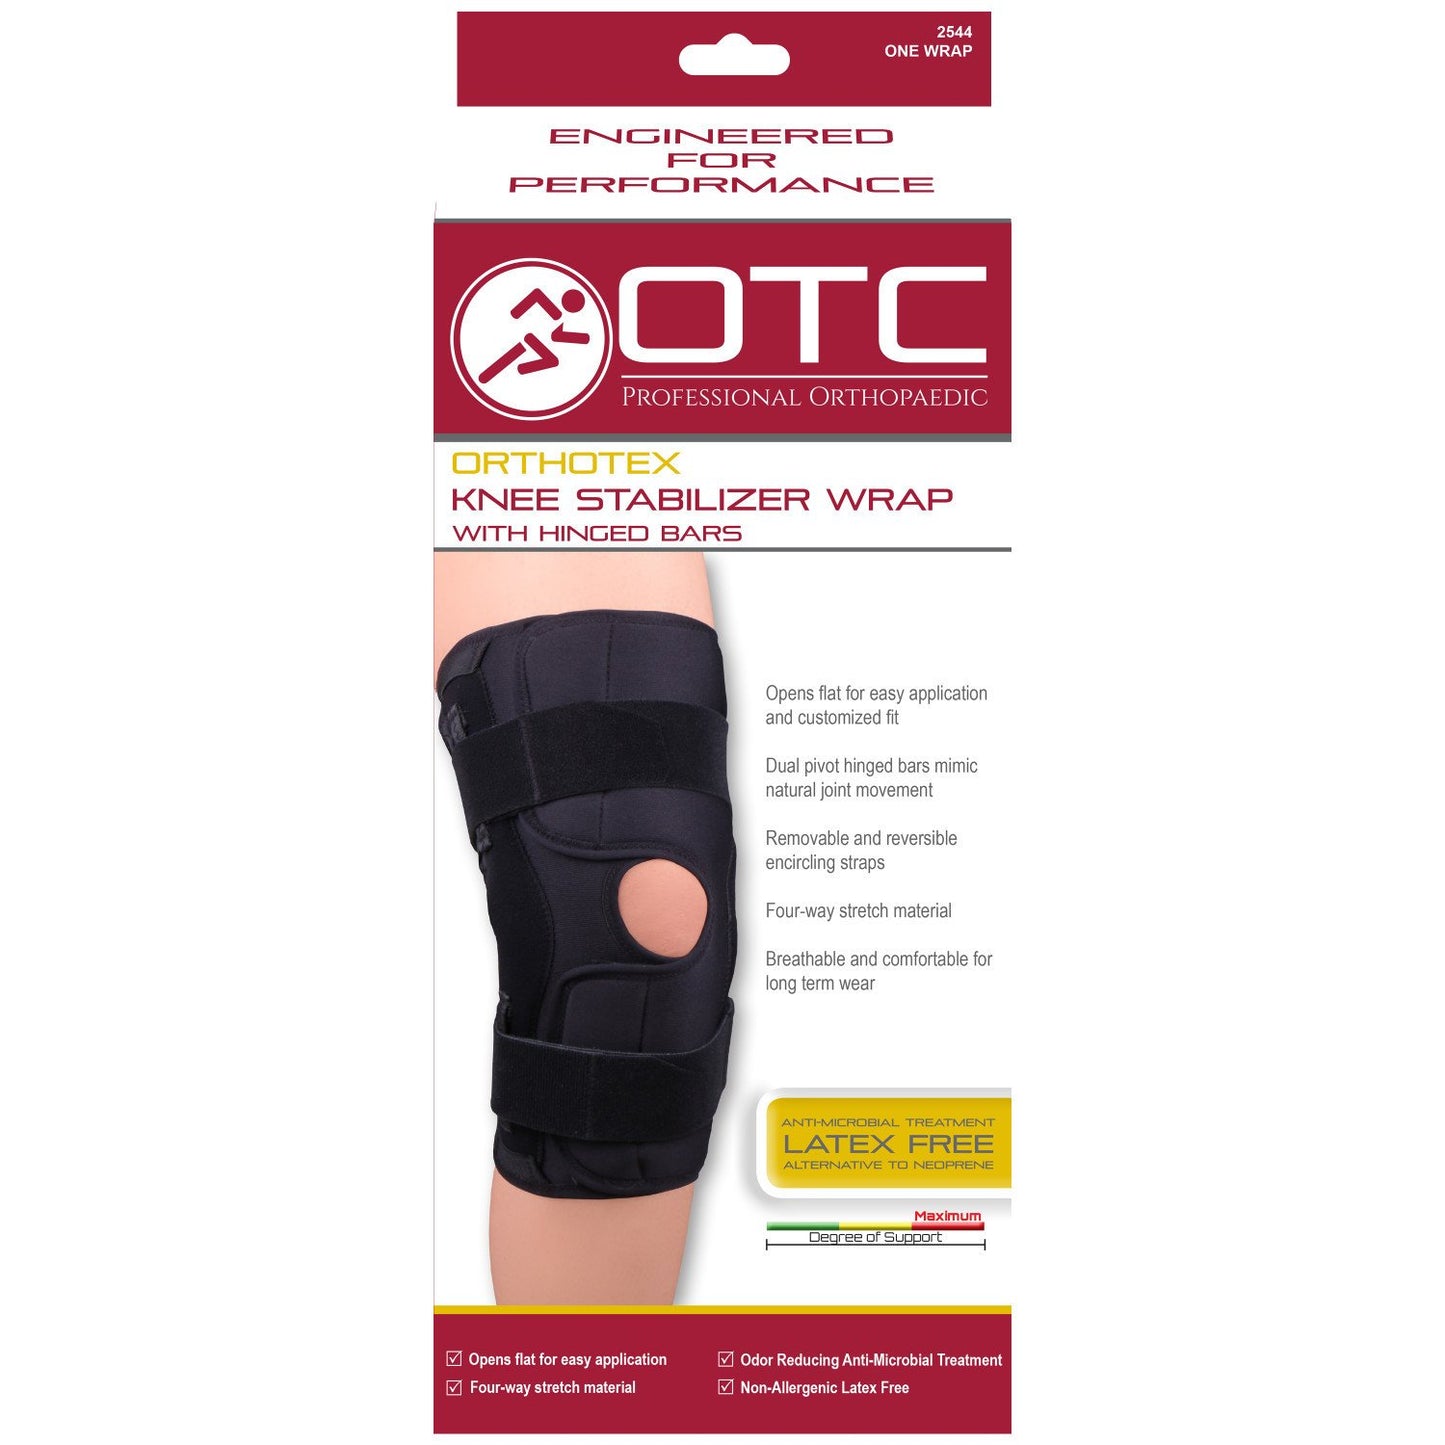 ORTHOTEX Advanced Hinged Bars Knee Stabilizer Wrap for Ultimate Support